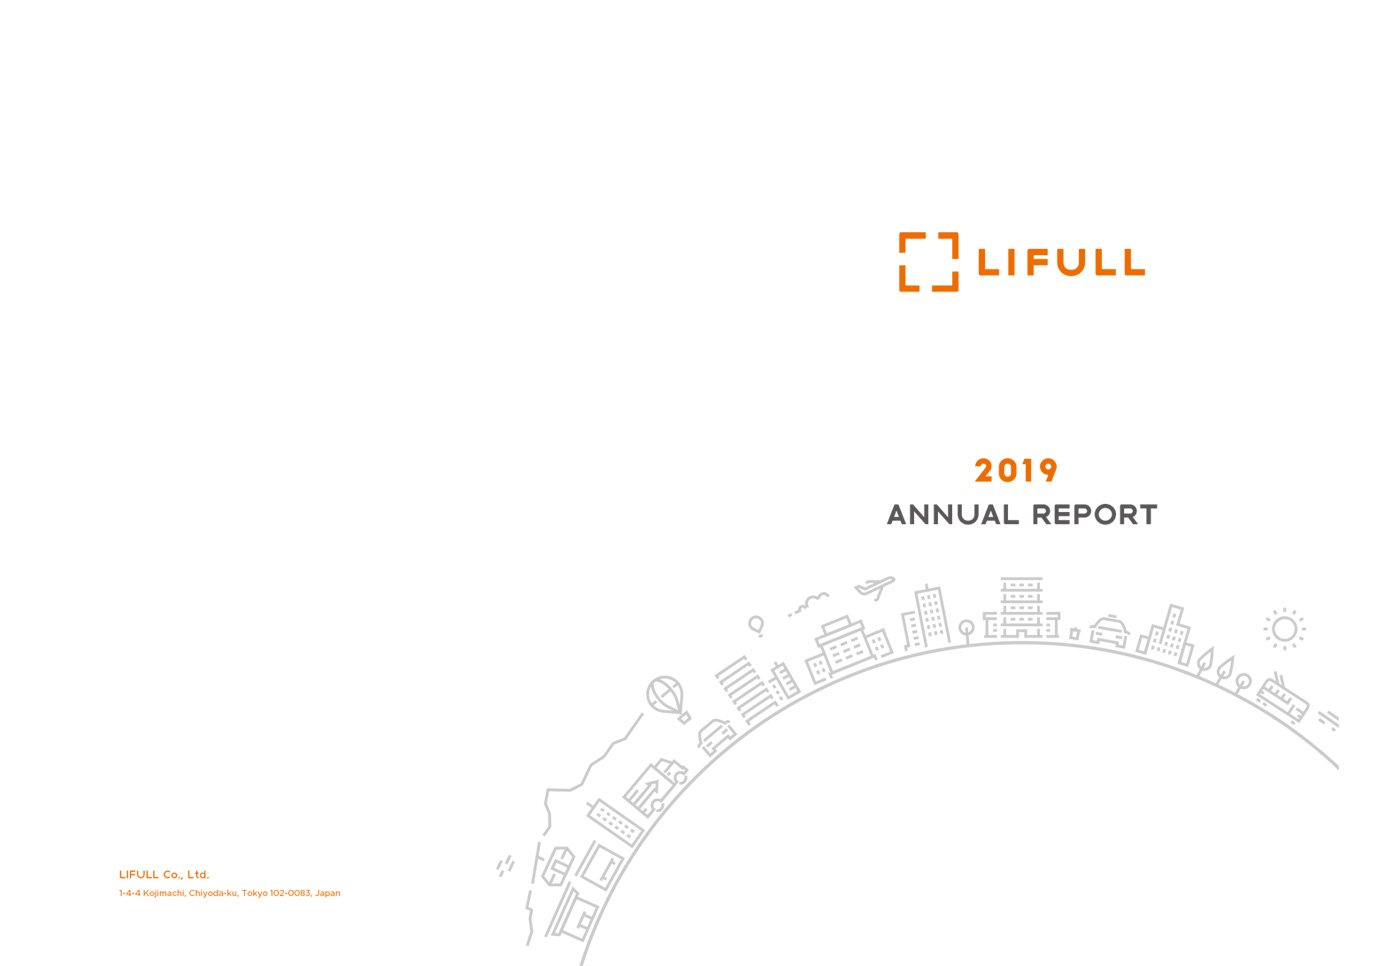 Annual Report 2019 (Facing Pages)